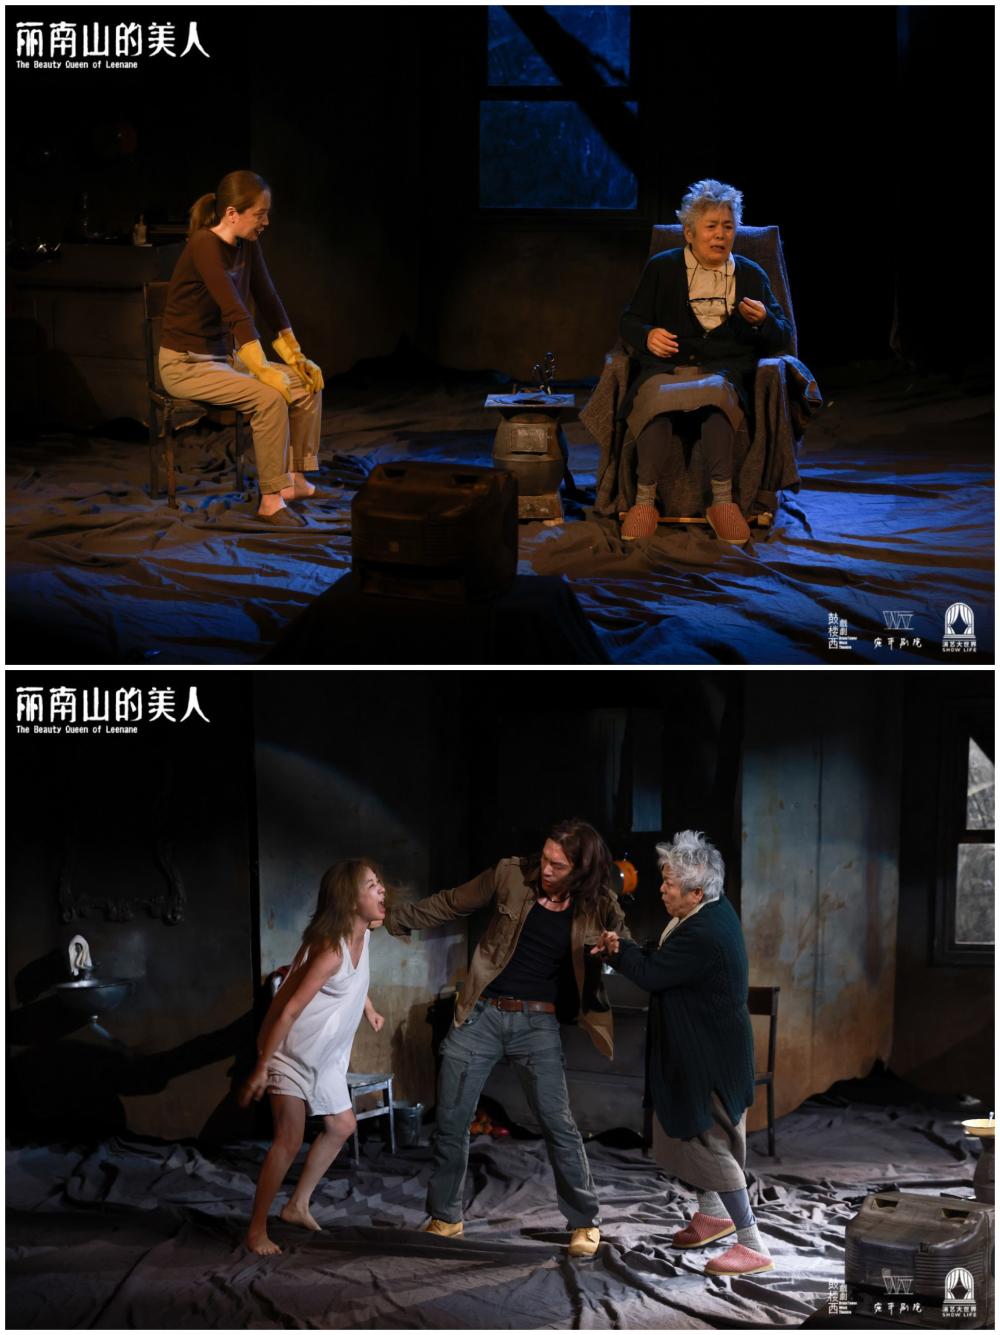 Martin McDonnell's trilogy first gathers in Shanghai, with Feng Xianzhen leading the theater of "The Beauty of Mount Linan" | Drama | Trilogy